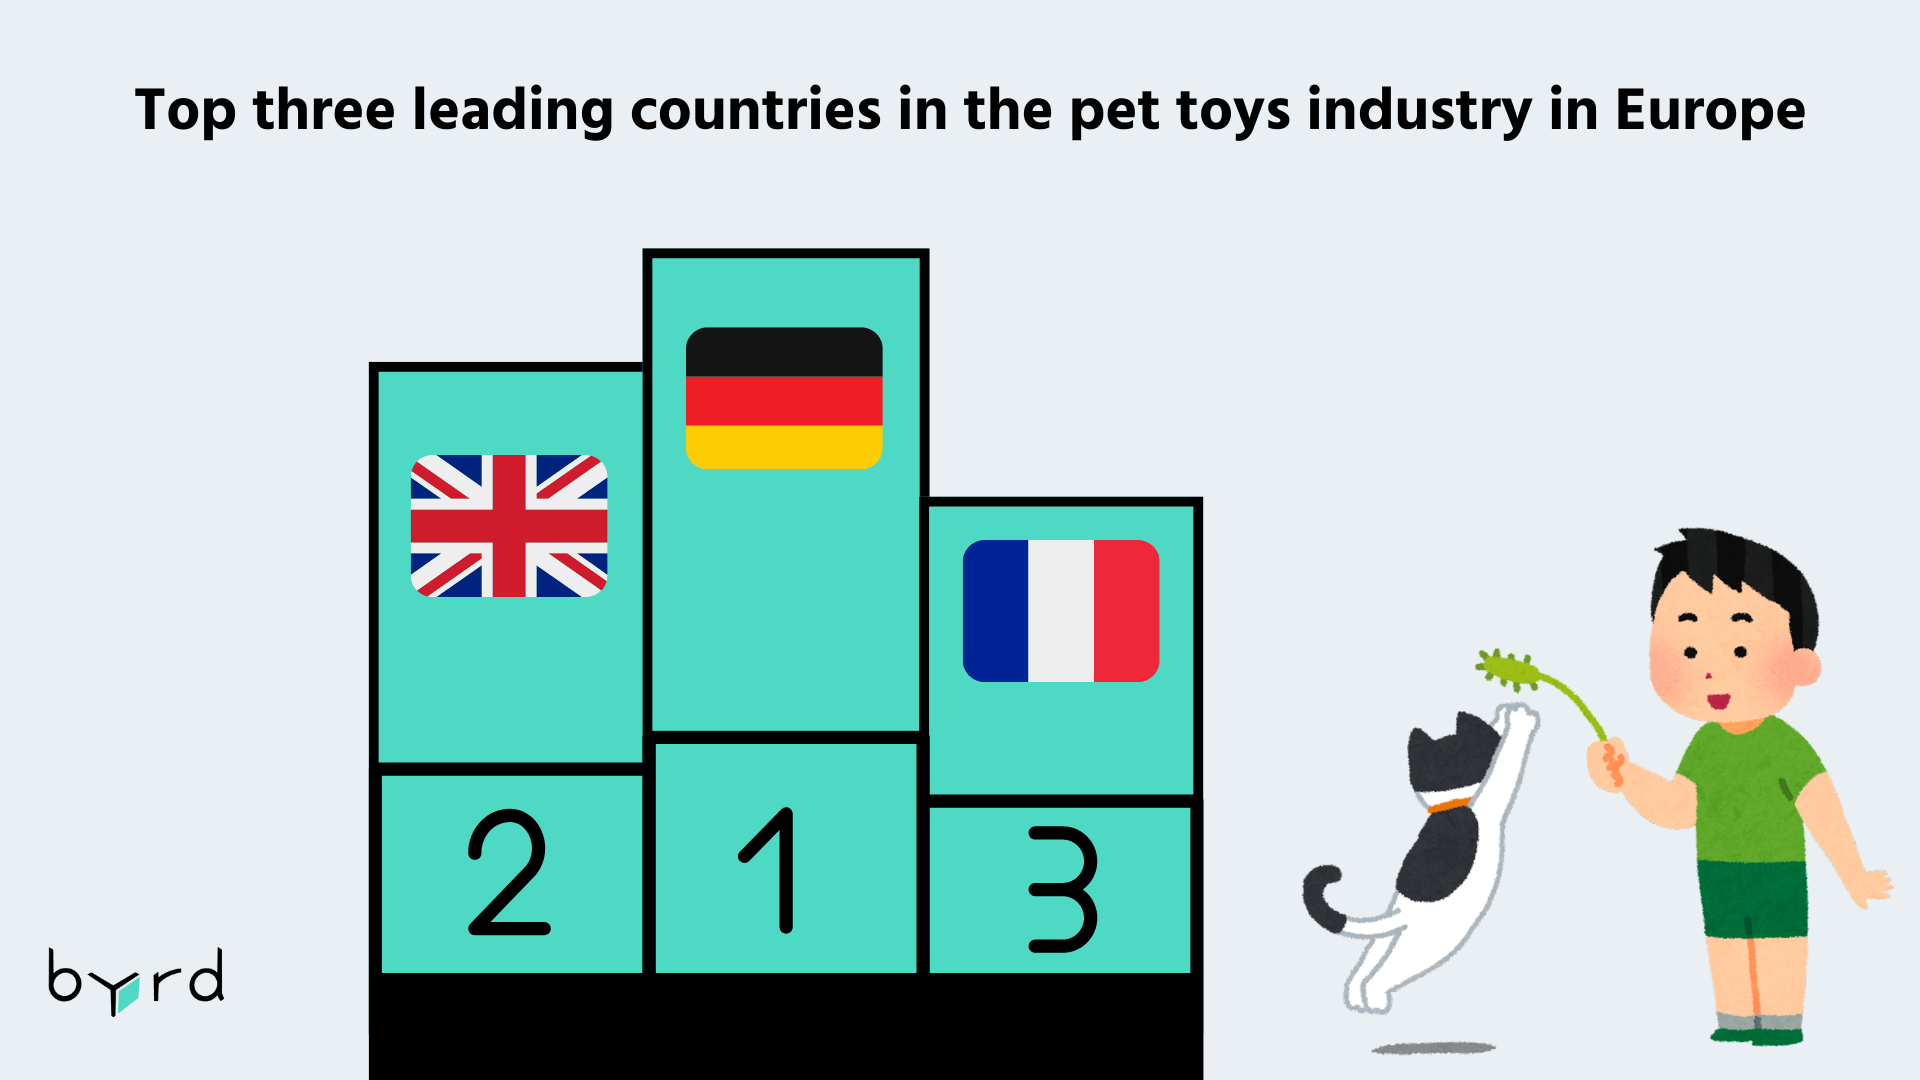 The key players countries in this pet toys market are: 